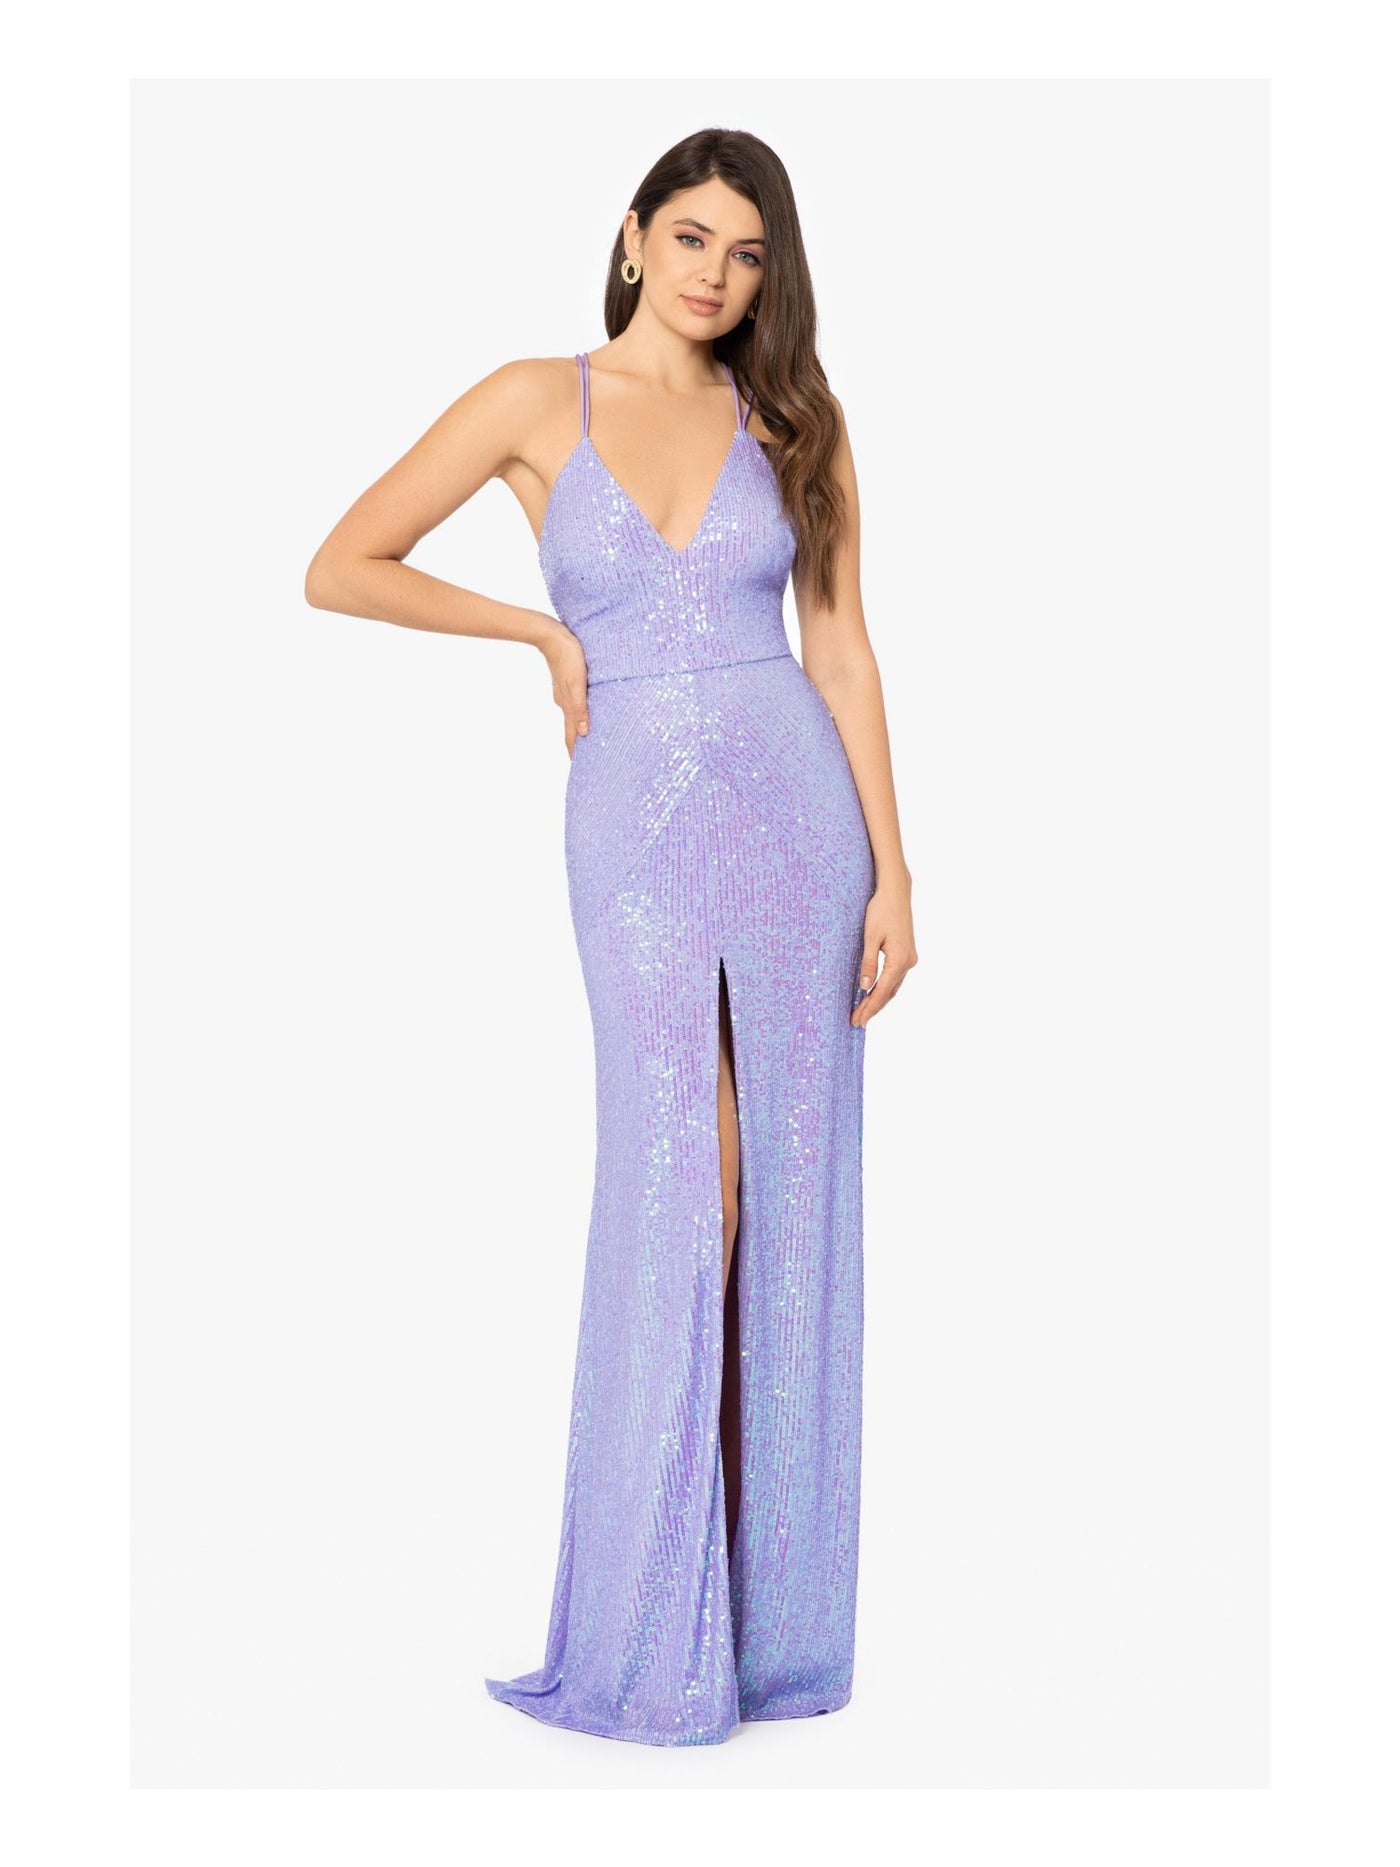 BLONDIE NITES Womens Purple Sequined Zippered Slitted Lined Sleeveless V Neck Full-Length Cocktail Gown Dress Juniors 3